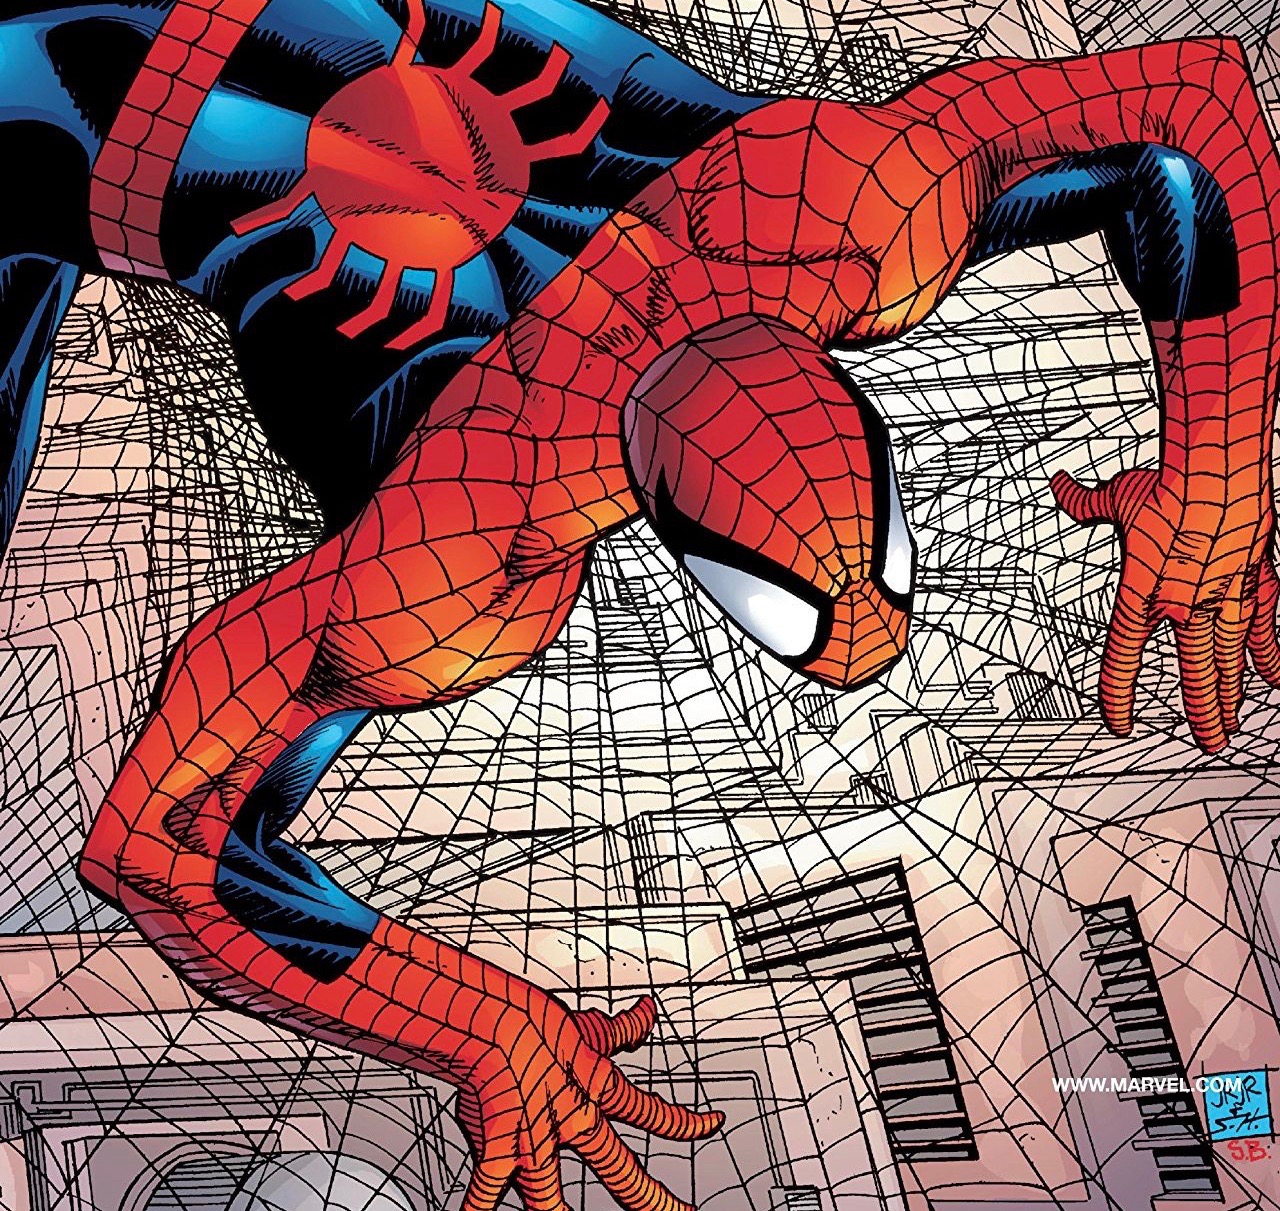 FAN EXPO Boston 2018: Writer Howard Mackie reflects on writing Spider-Man in the '90s, the Clone Saga and 'killing off' Mary Jane Watson